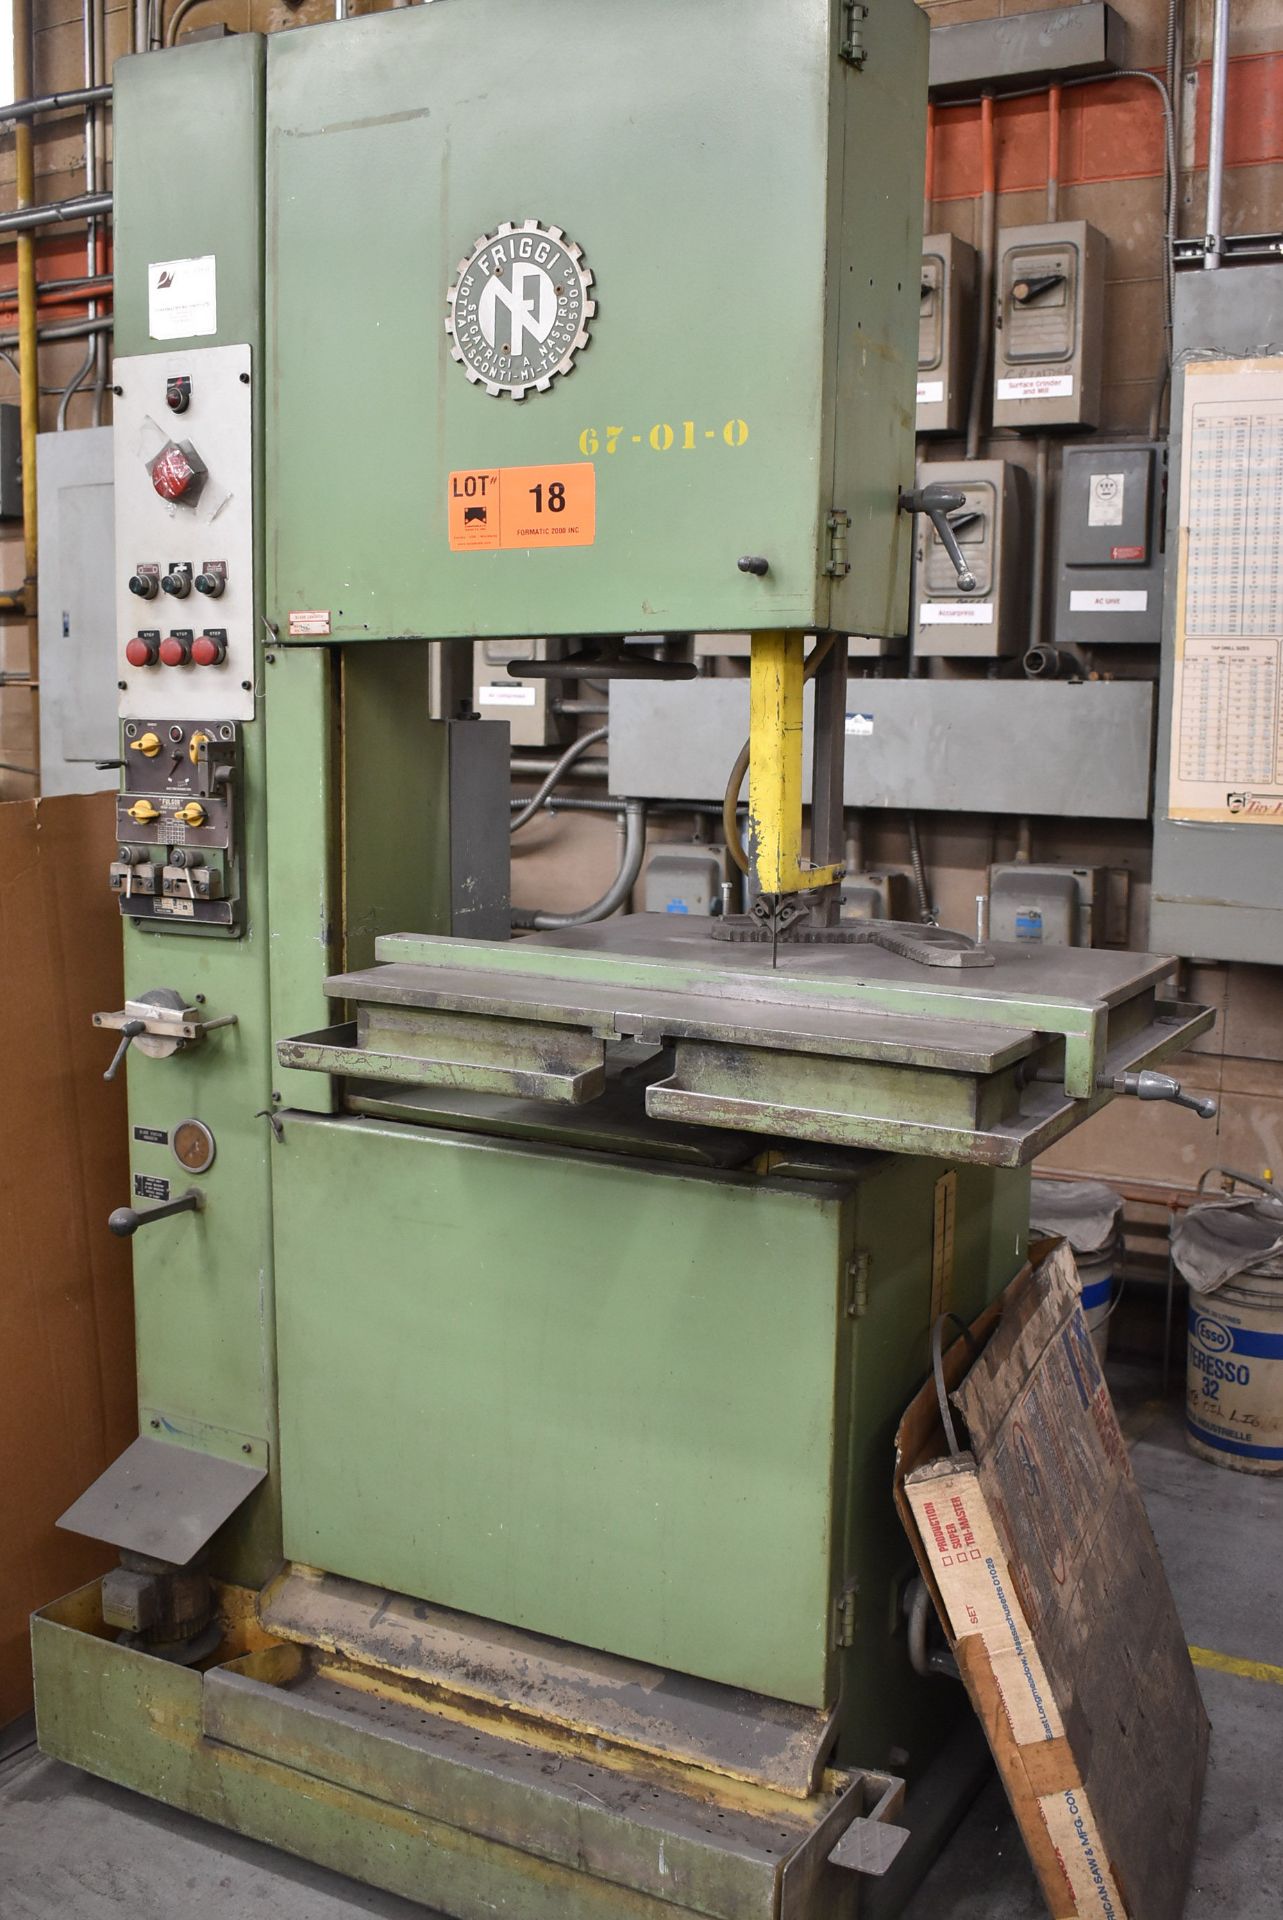 FRIGGI VERTICAL BAND SAW WITH 26"X26" TABLE, 20" THROAT, SPEEDS TO 948 M/MIN, 14" WORKPIECE